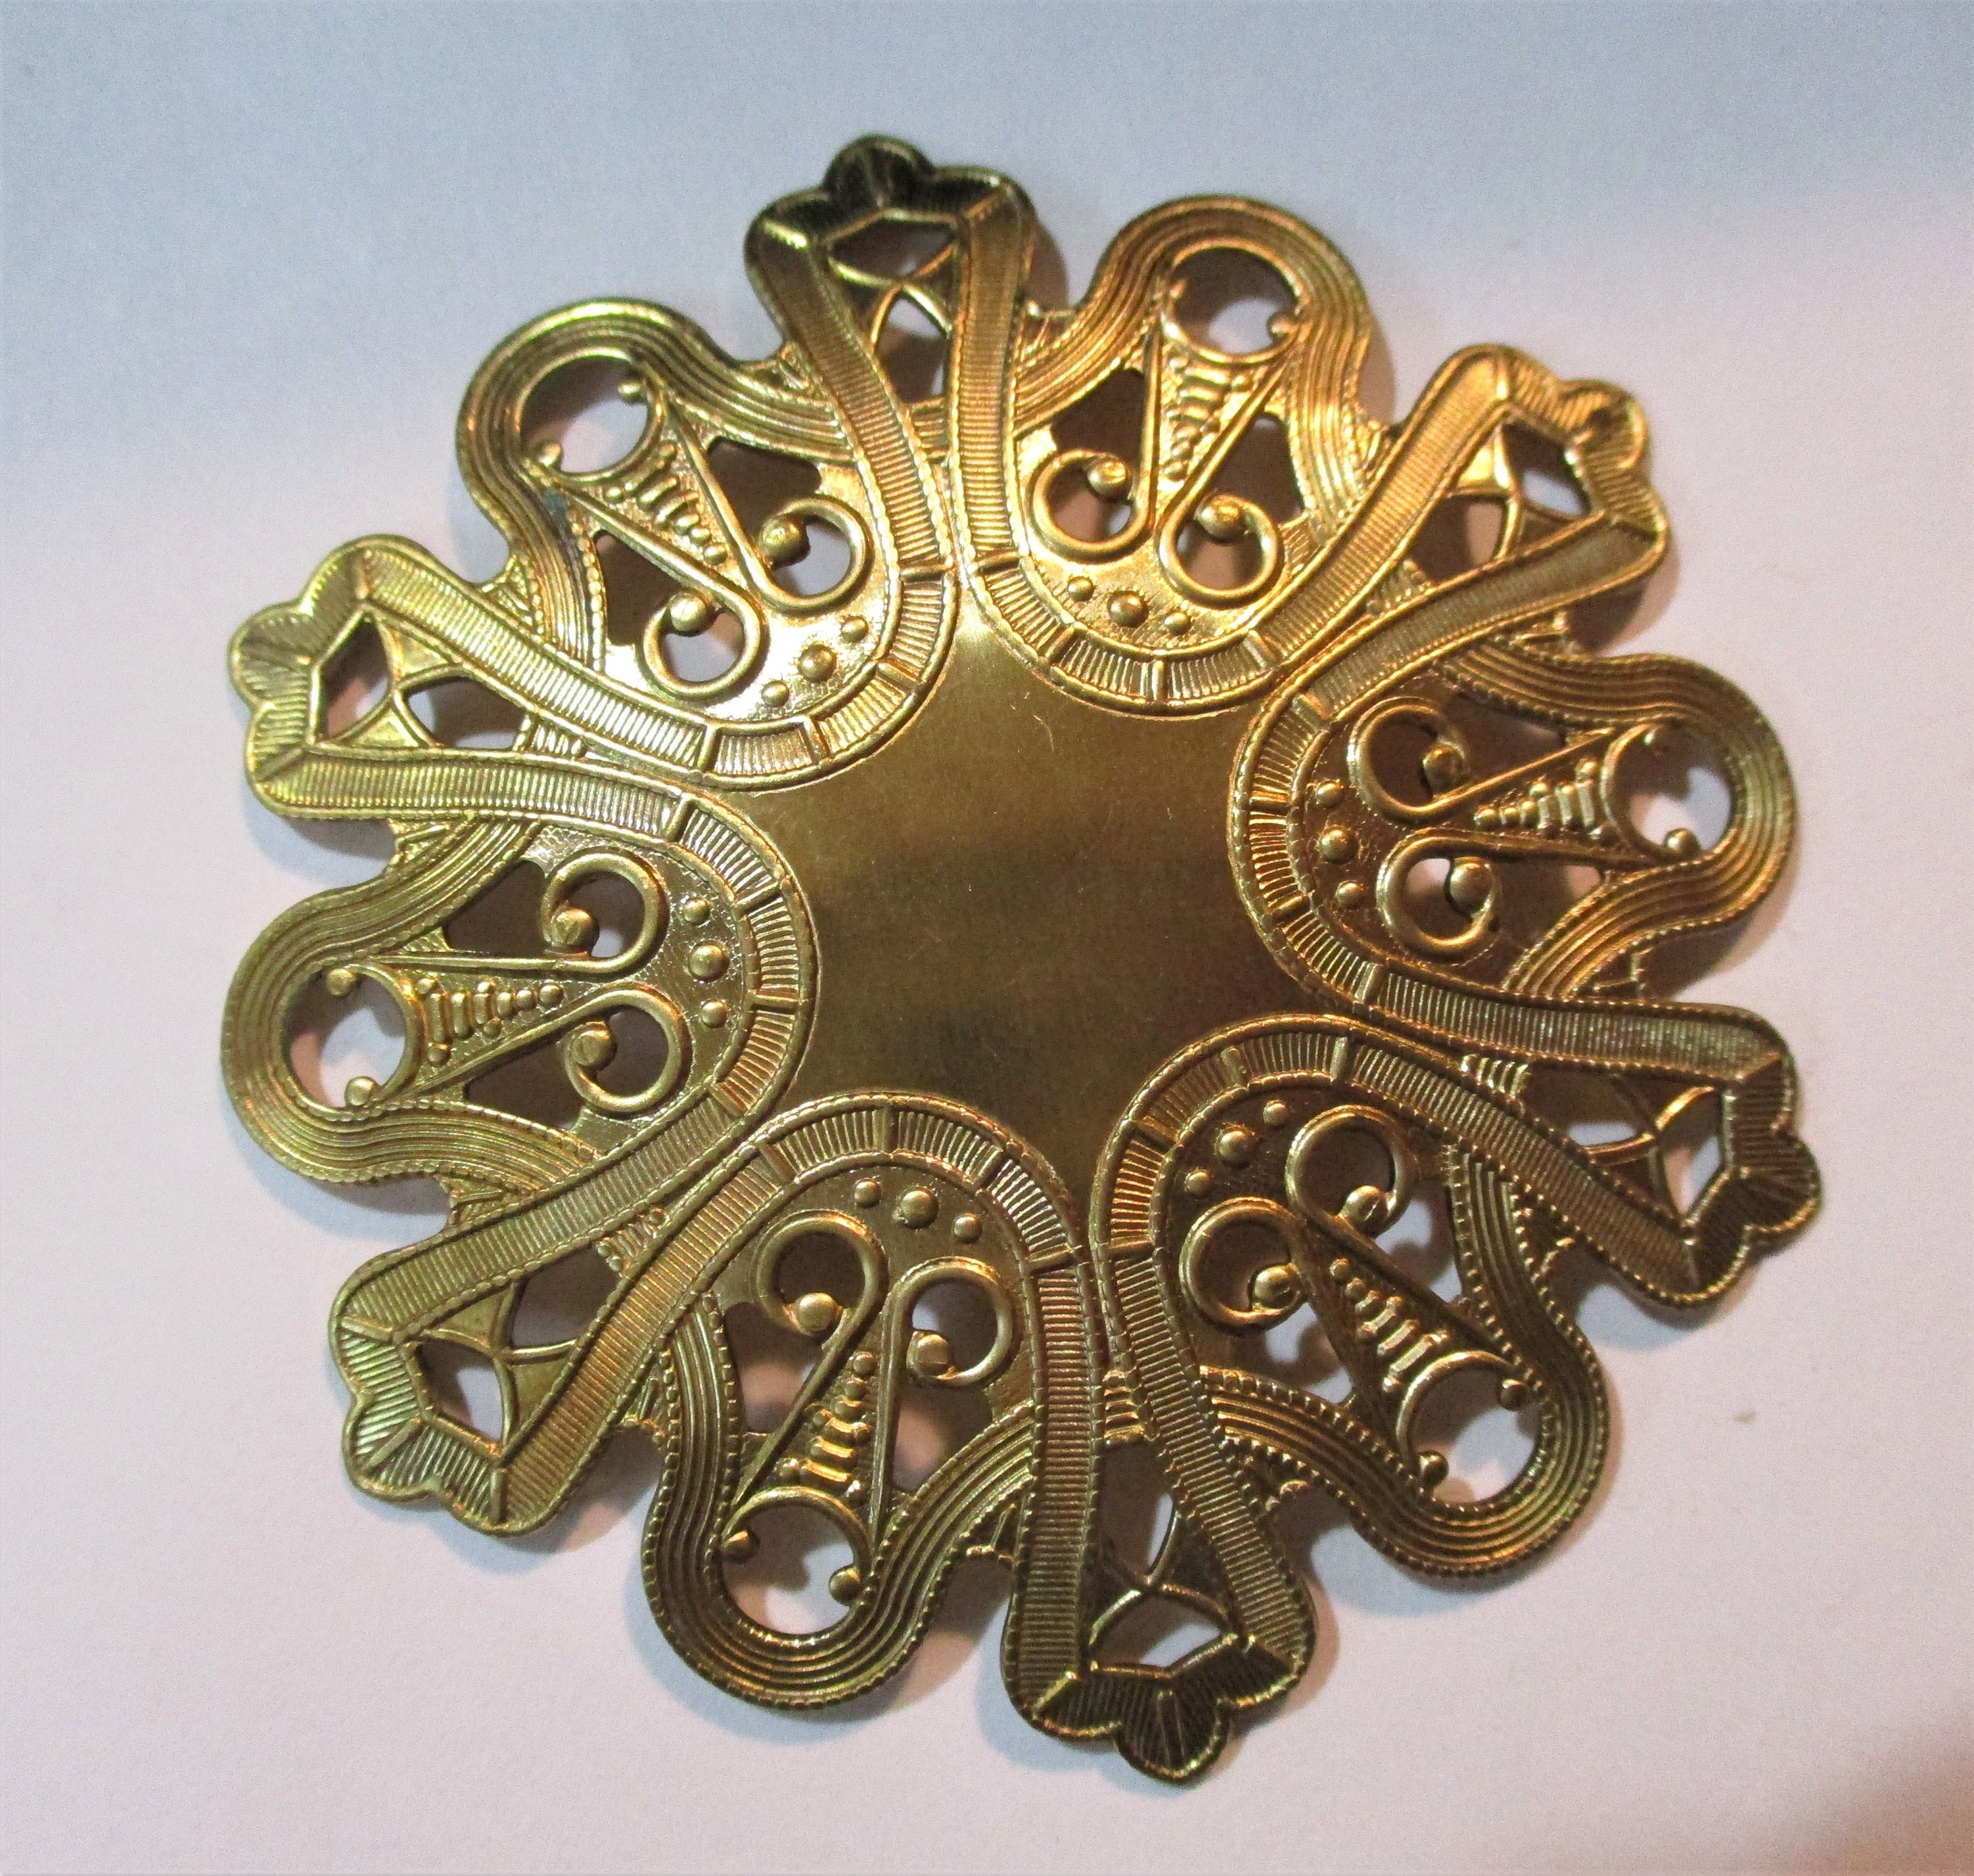 Vintage Abstract Hammered Stamped Brass Arts & Crafts Movement Design Open Work Medallion/Jewelry Component/Embellishment Round 52mm 1 Pc.